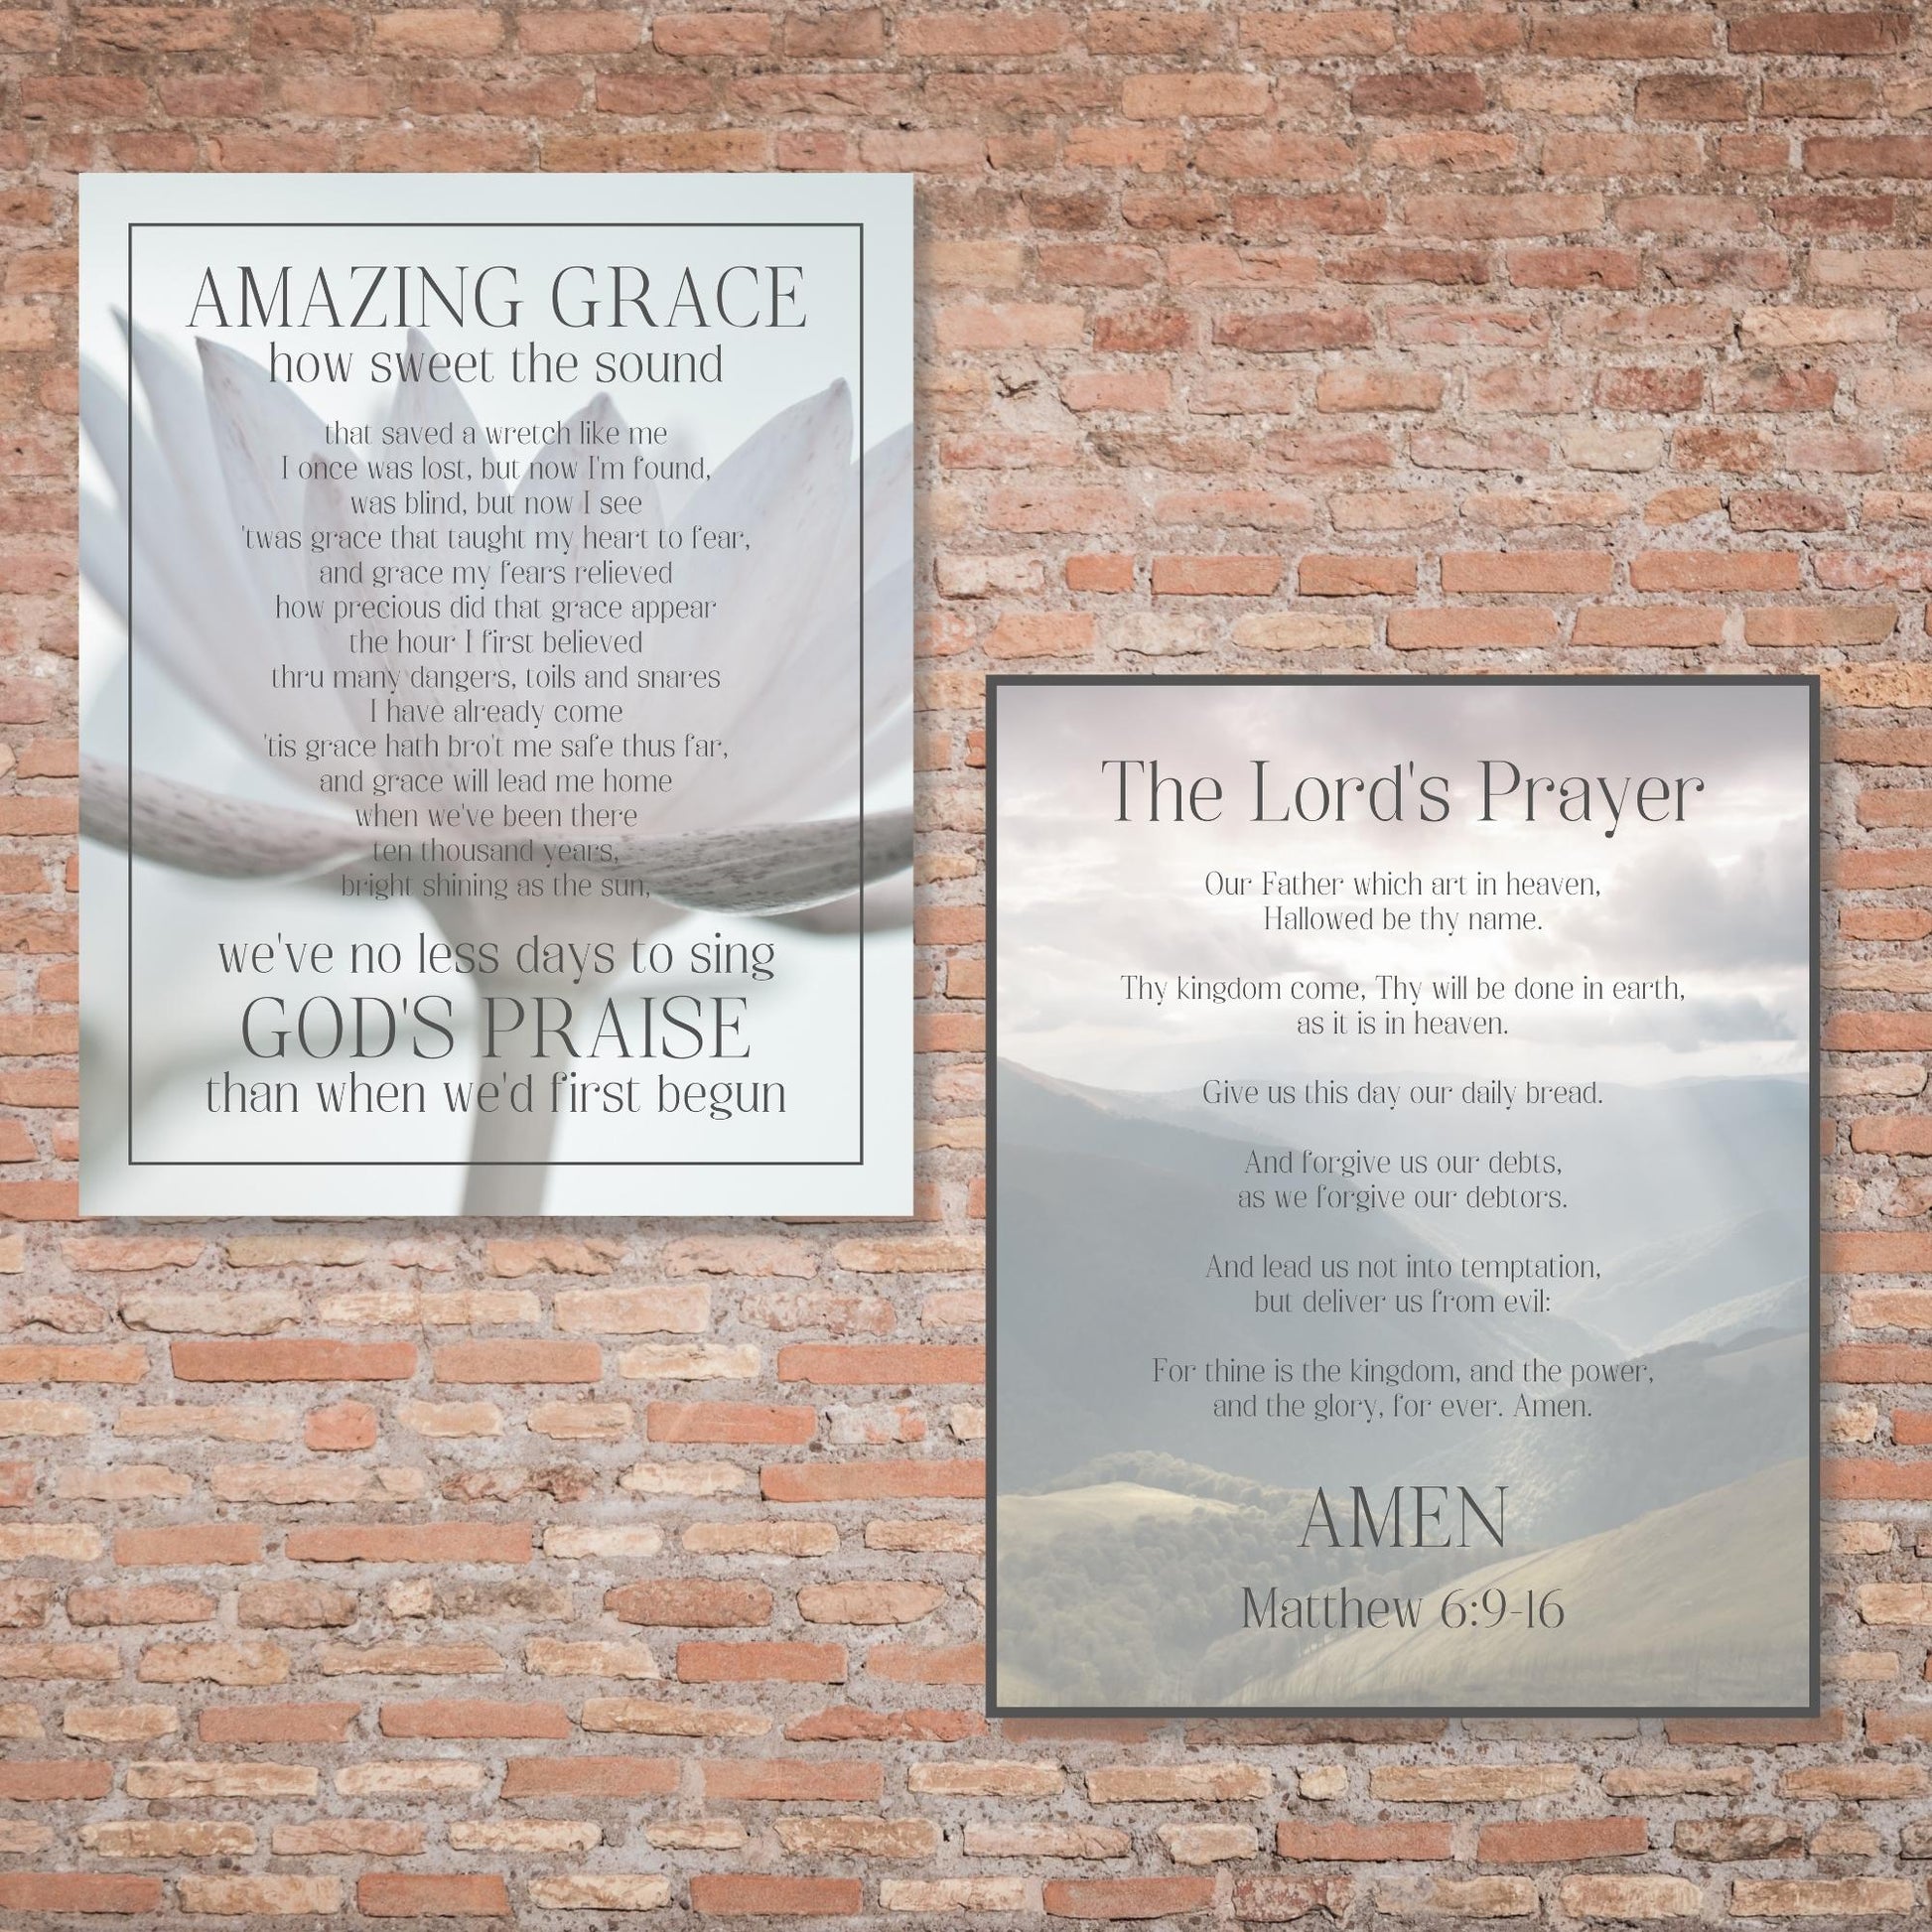 Inspirational Song Lyric Wall Art - AMAZING GRACE how sweet the sound... Christian Wall Poster (16x20) | Shown with The Lord's Prayer Wall Art Poster | oak7west.com